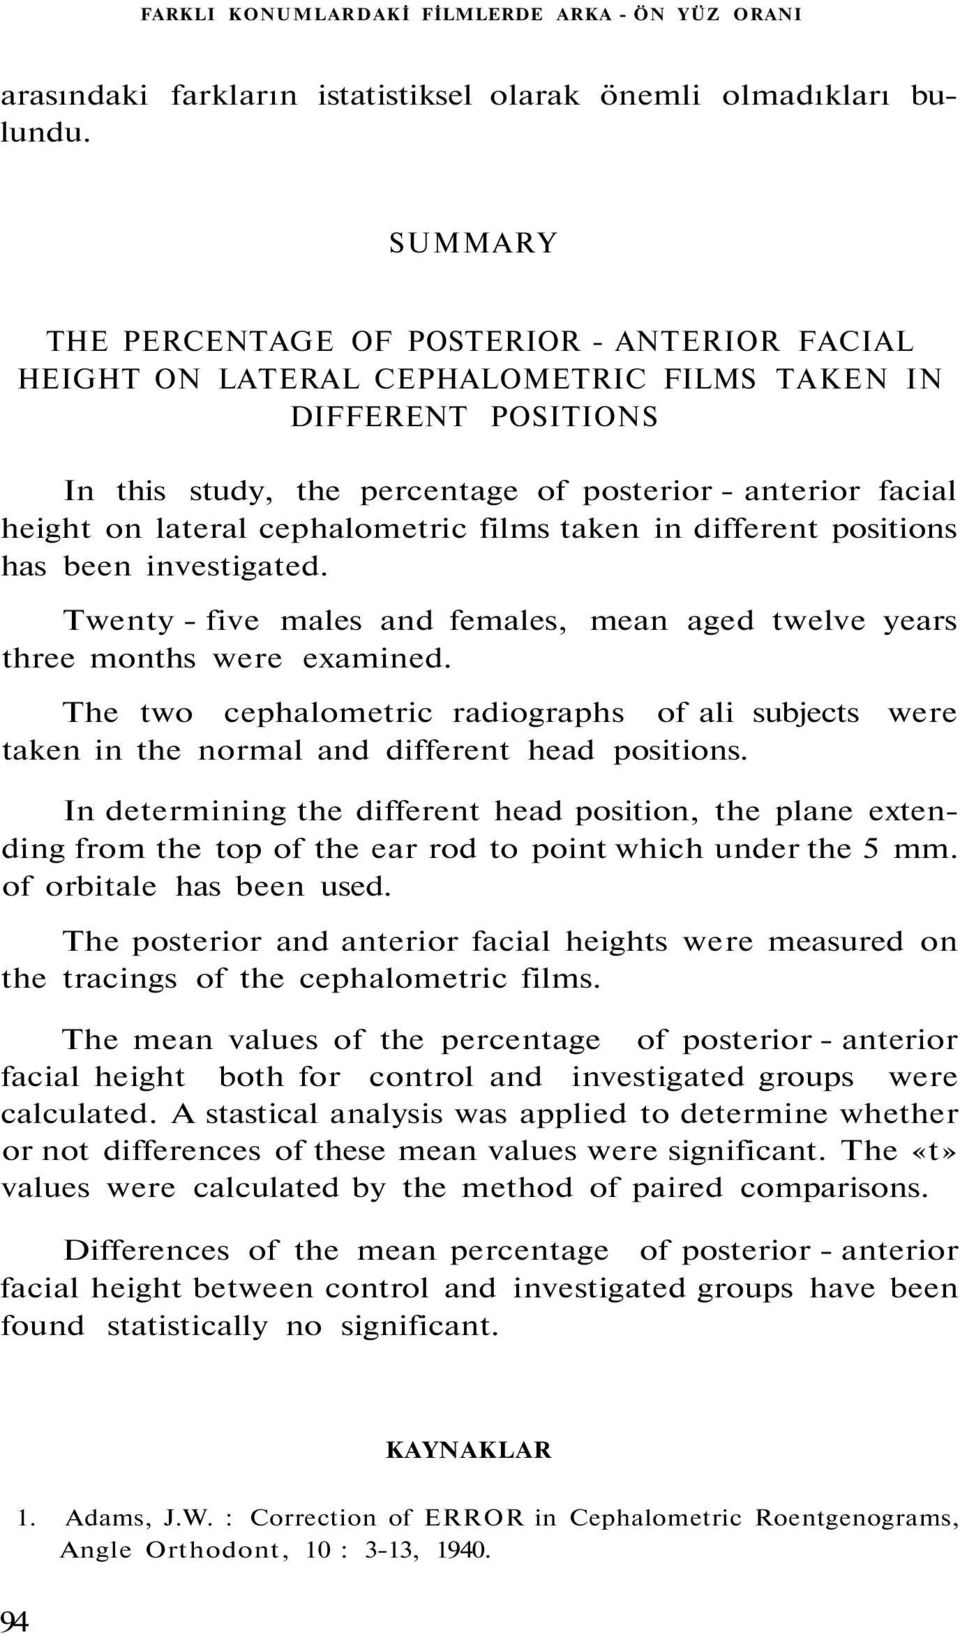 cephalometric films taken in different positions has been investigated. Twenty - five males and females, mean aged twelve years three months were examined.